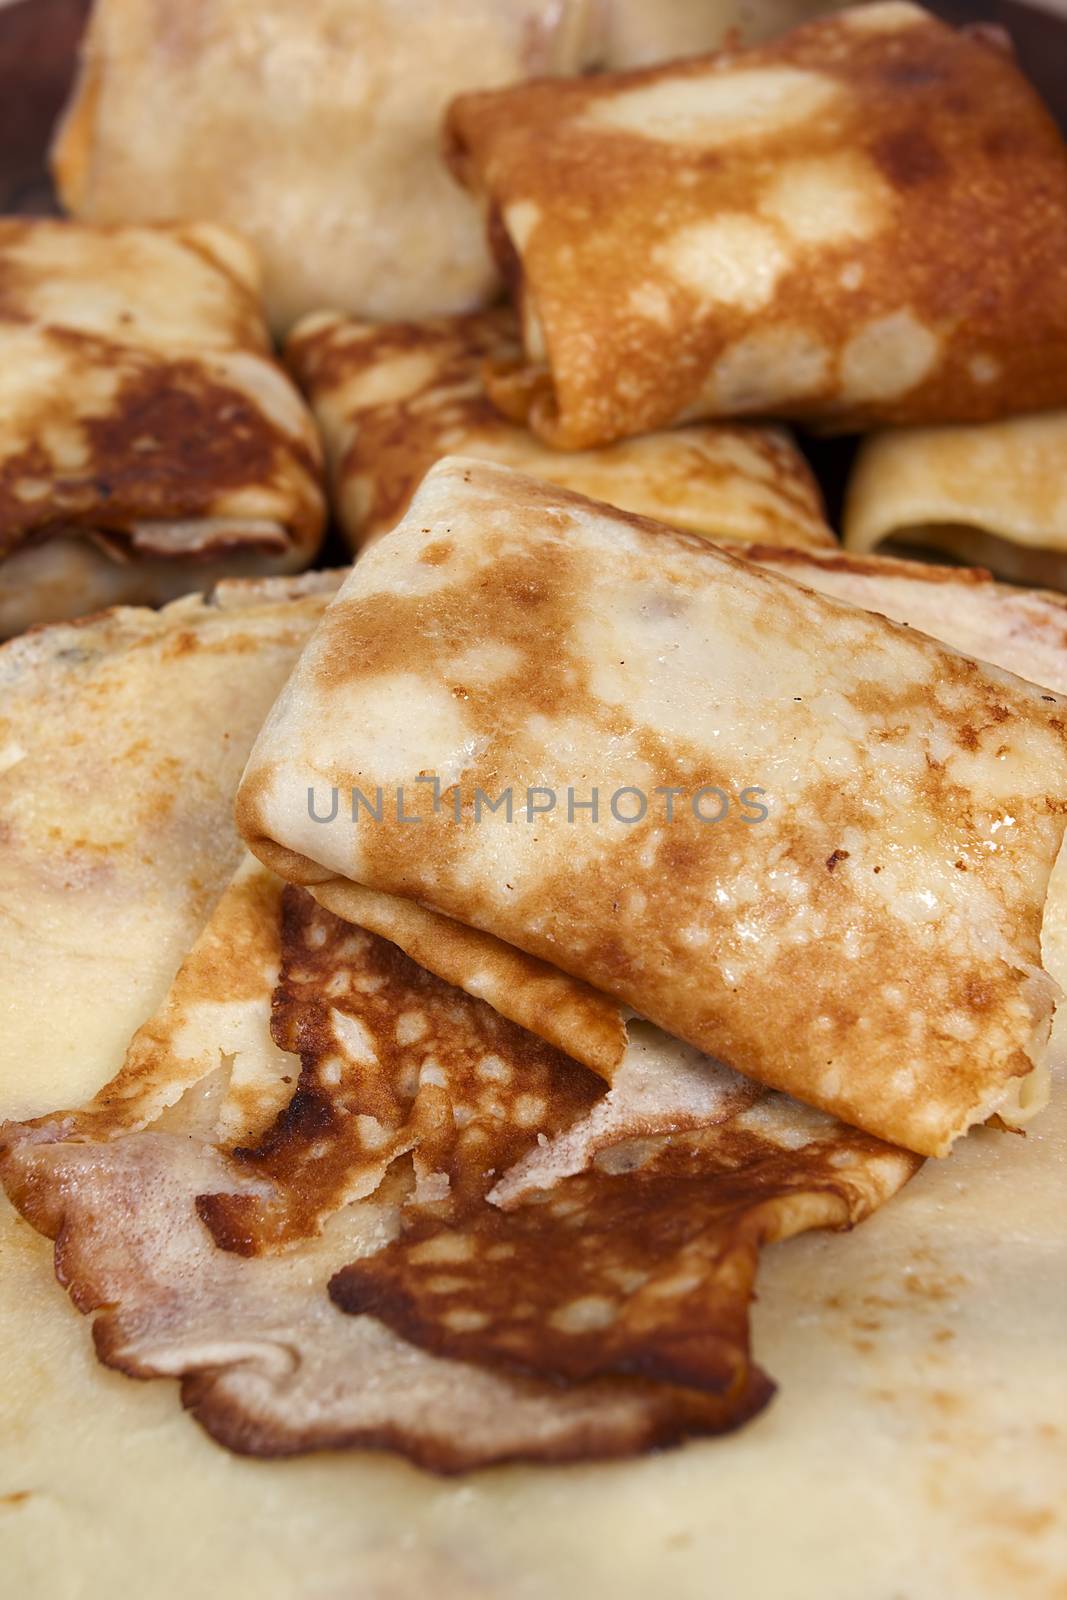 Freshly baked pancakes and wrapped with meat